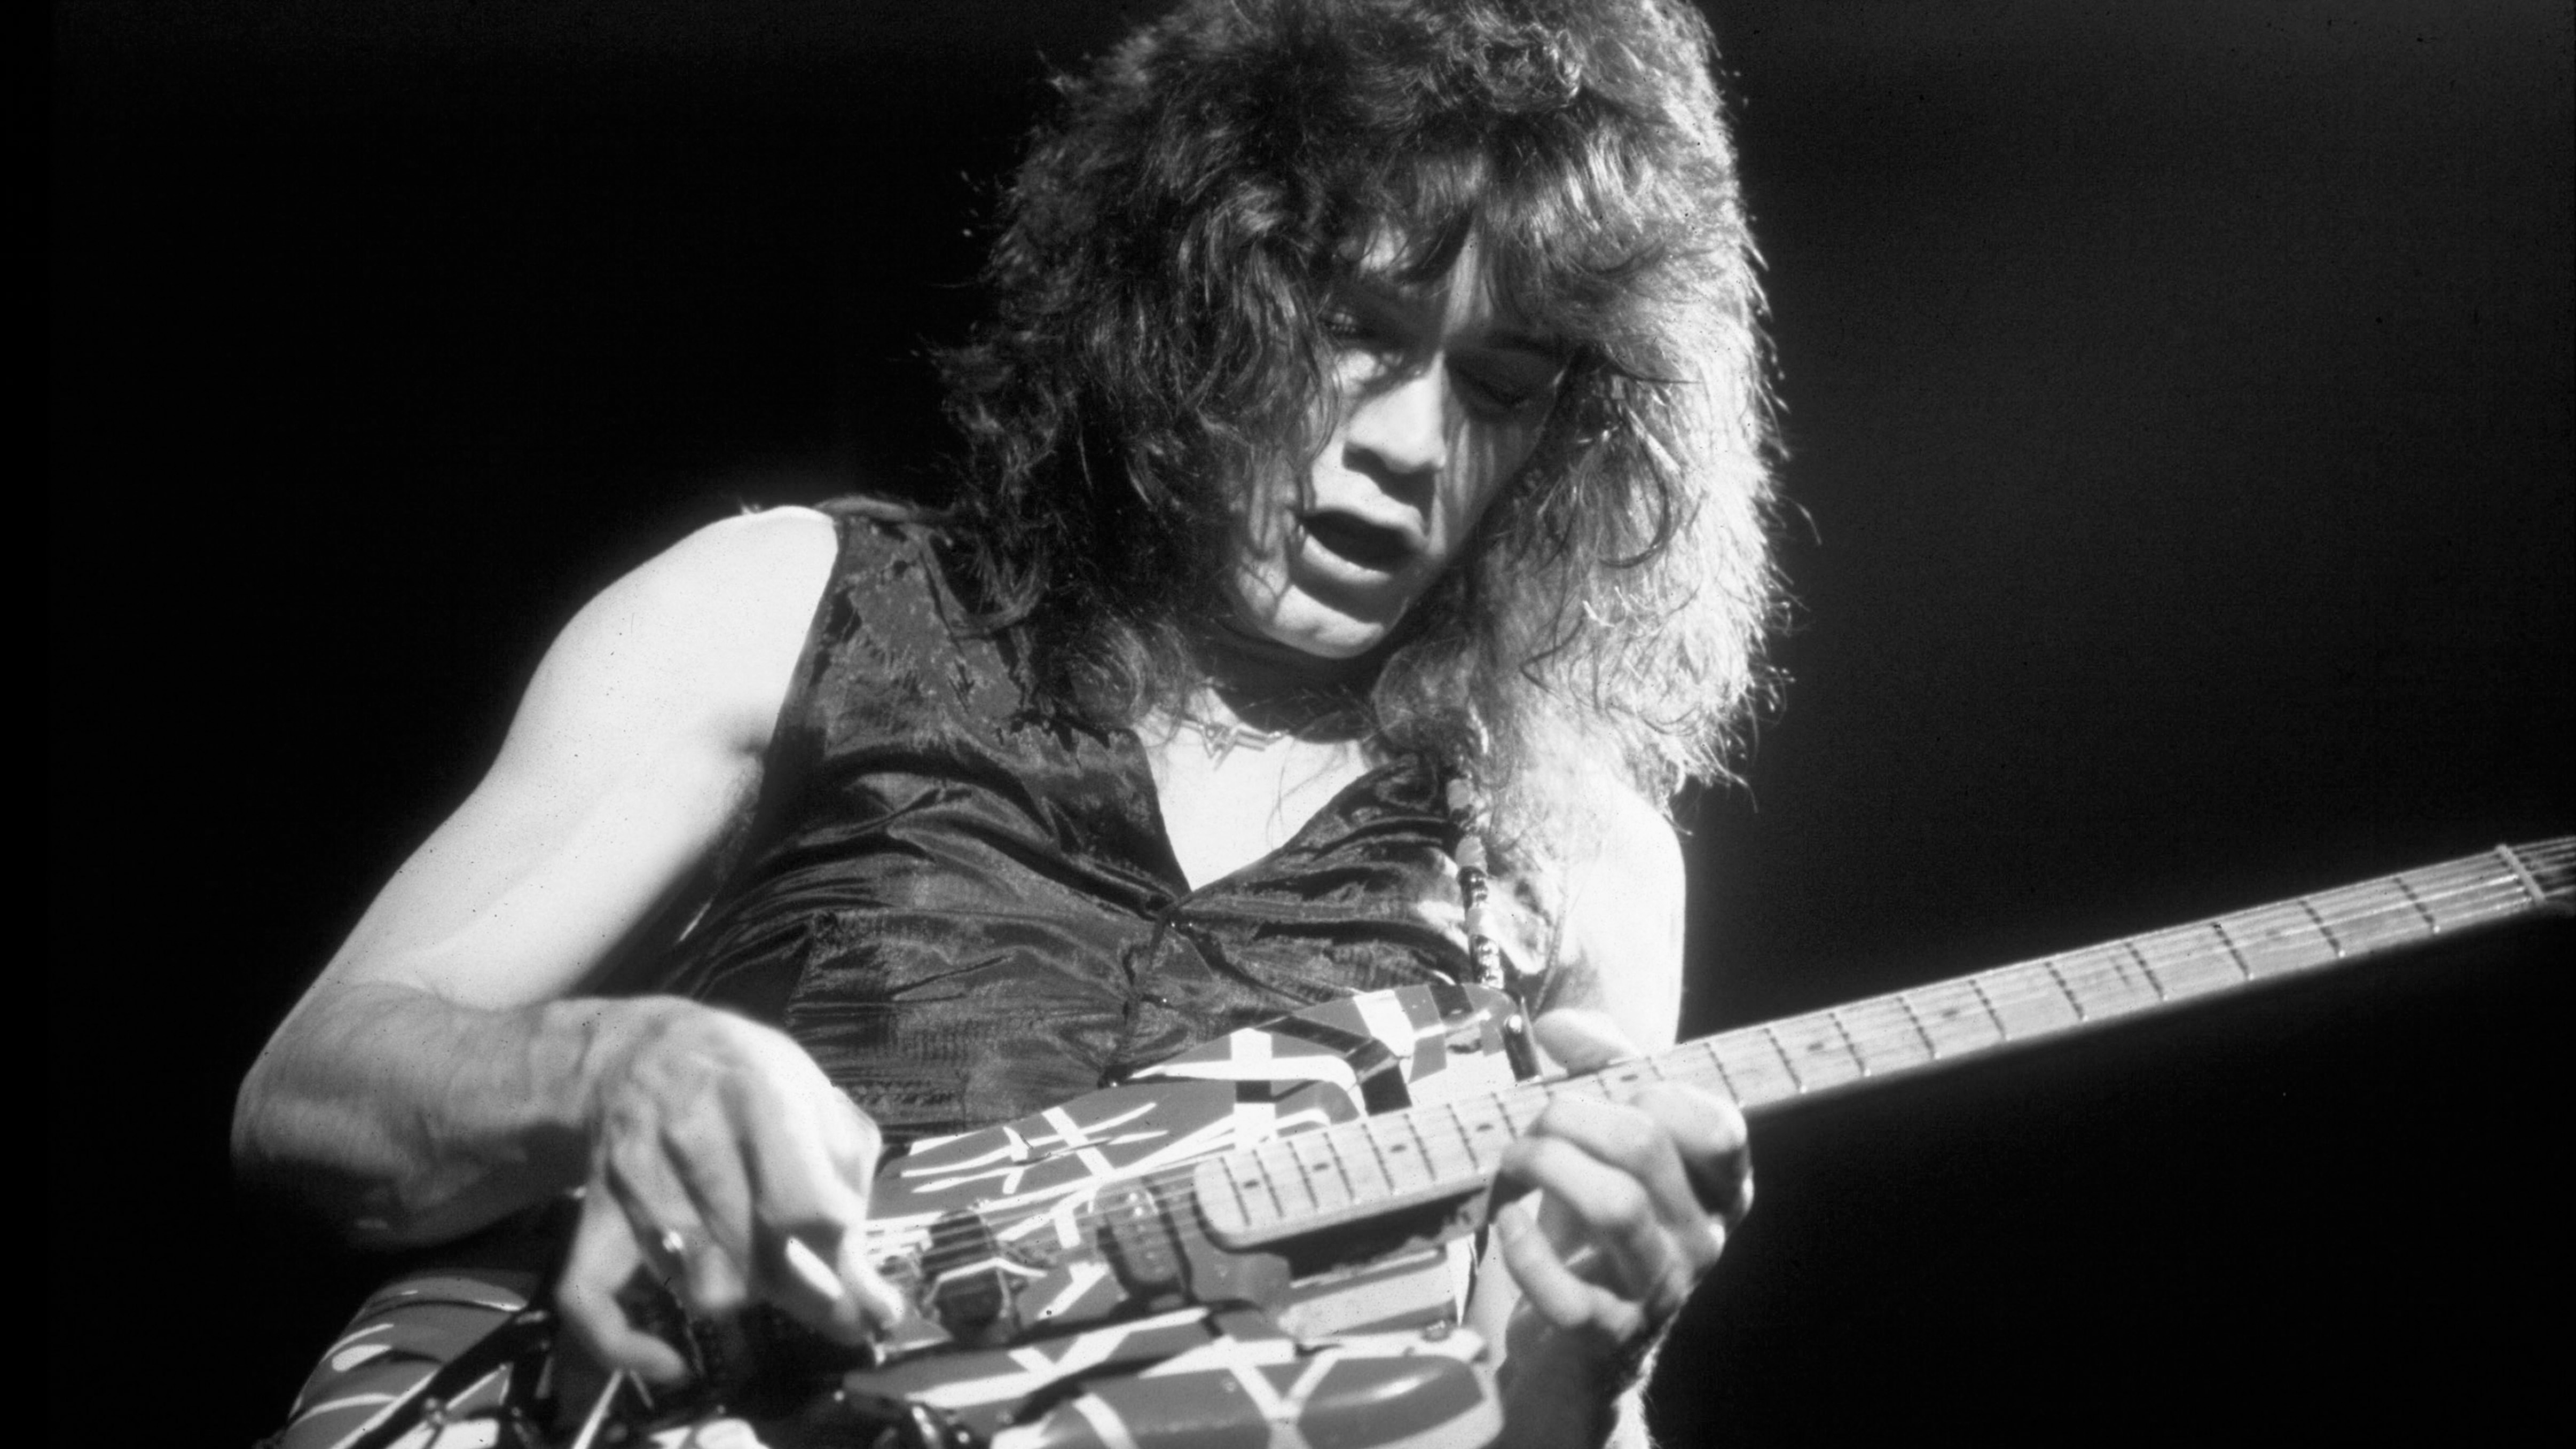 OU812: The Lore and Legacy of Van Halen's Iconic Album